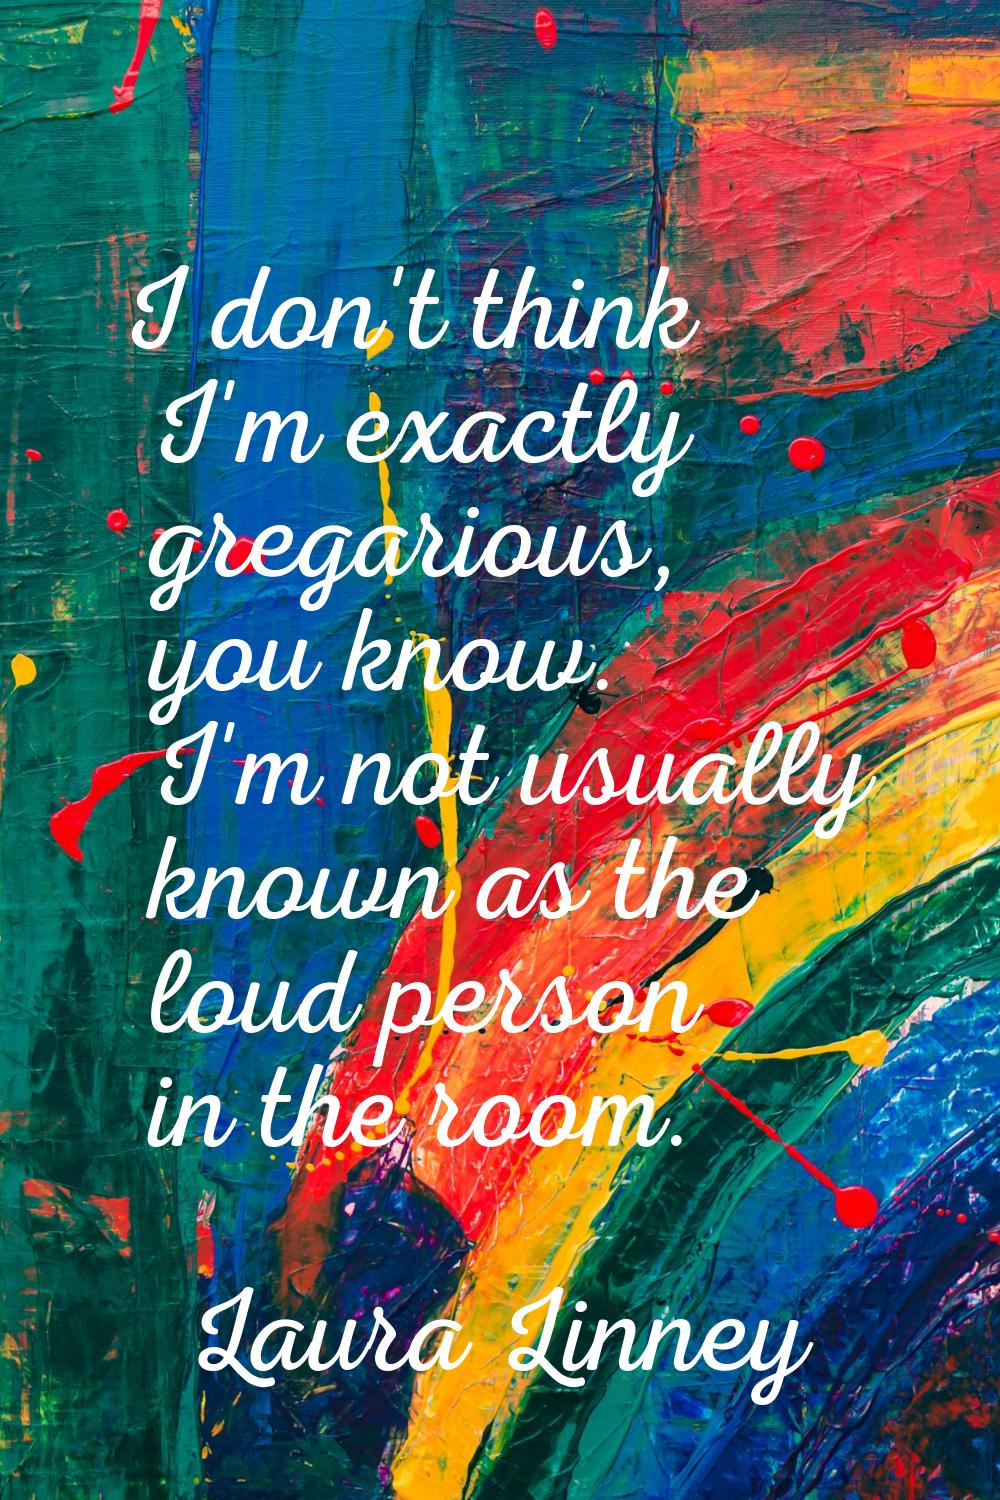 I don't think I'm exactly gregarious, you know. I'm not usually known as the loud person in the roo